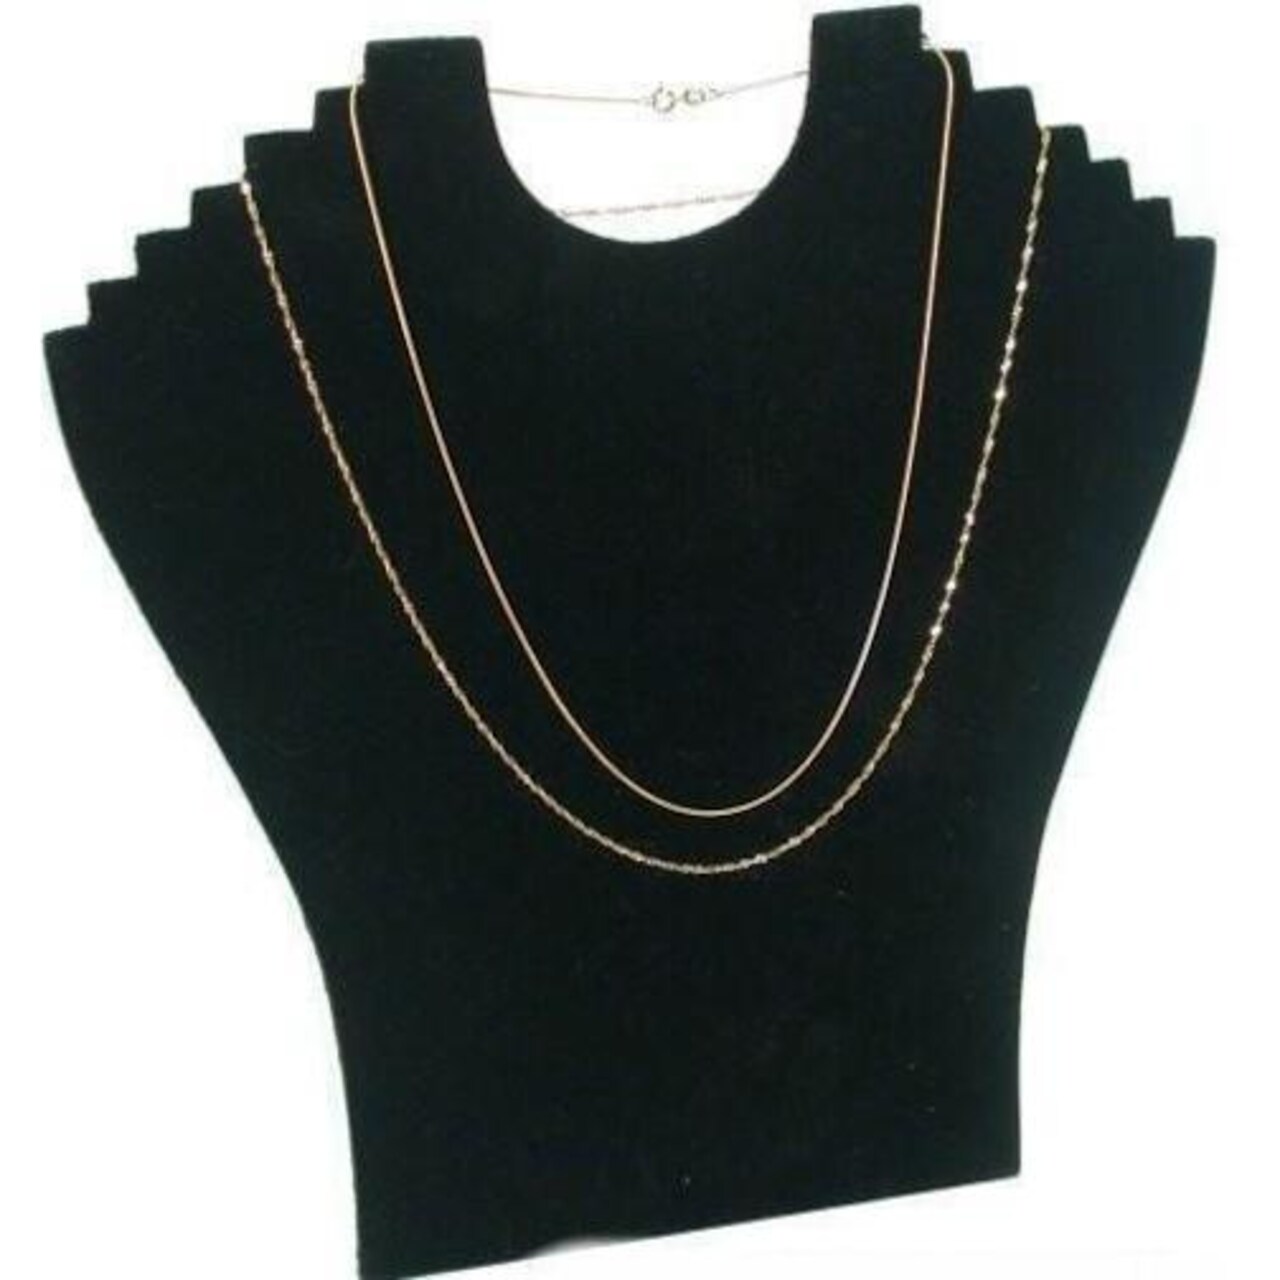 6-Tier Black Necklace Chain Holder Plastic Bust Display